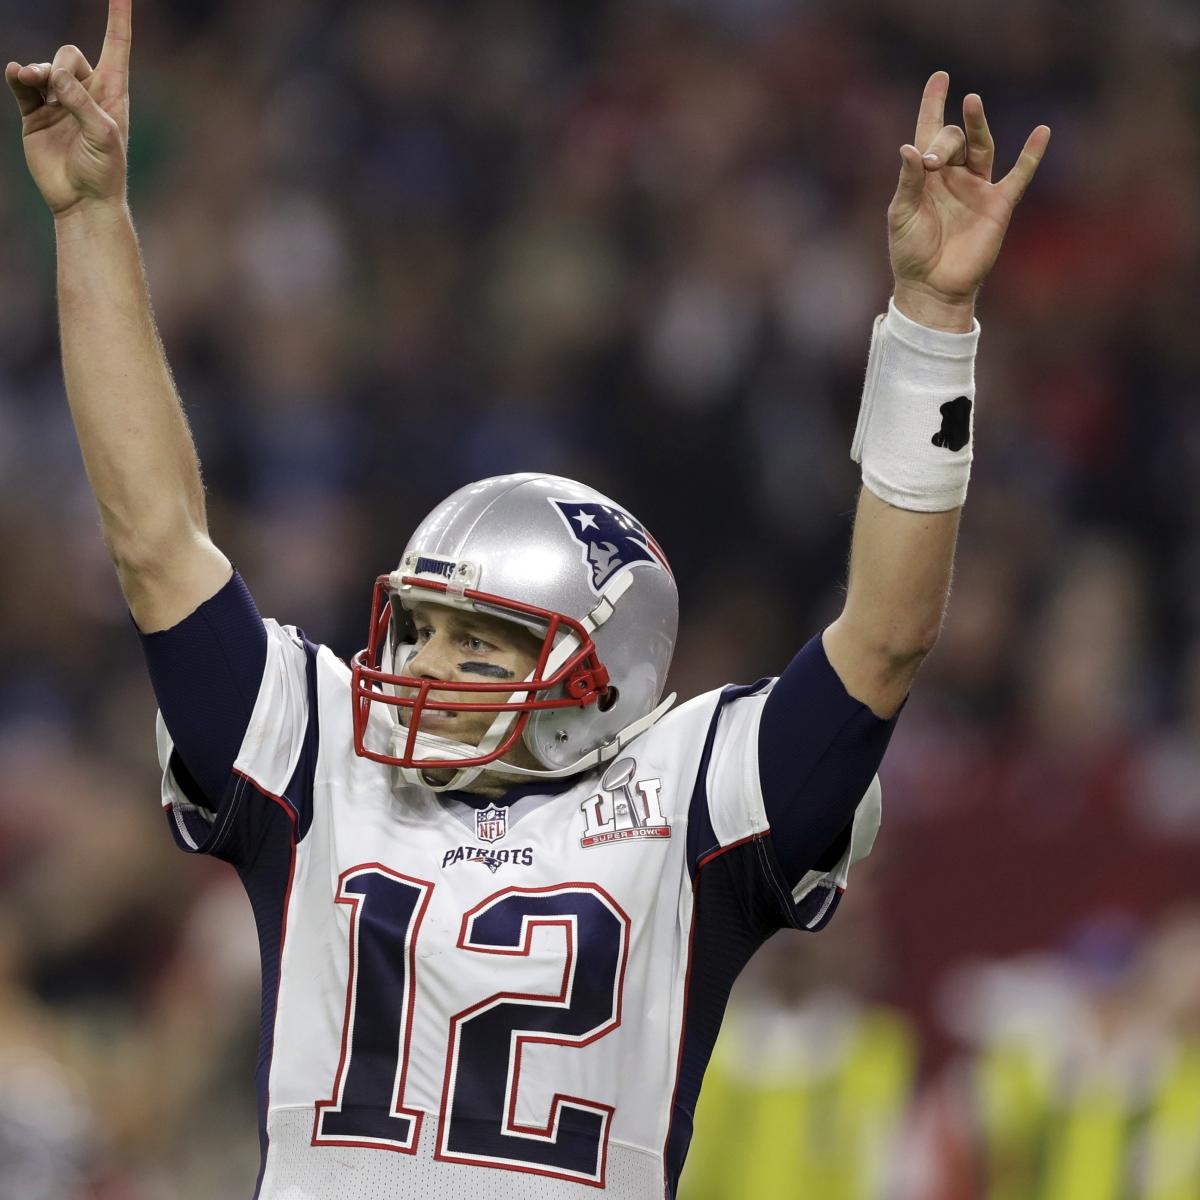 The highest-paid player in Super Bowl is not Tom Brady